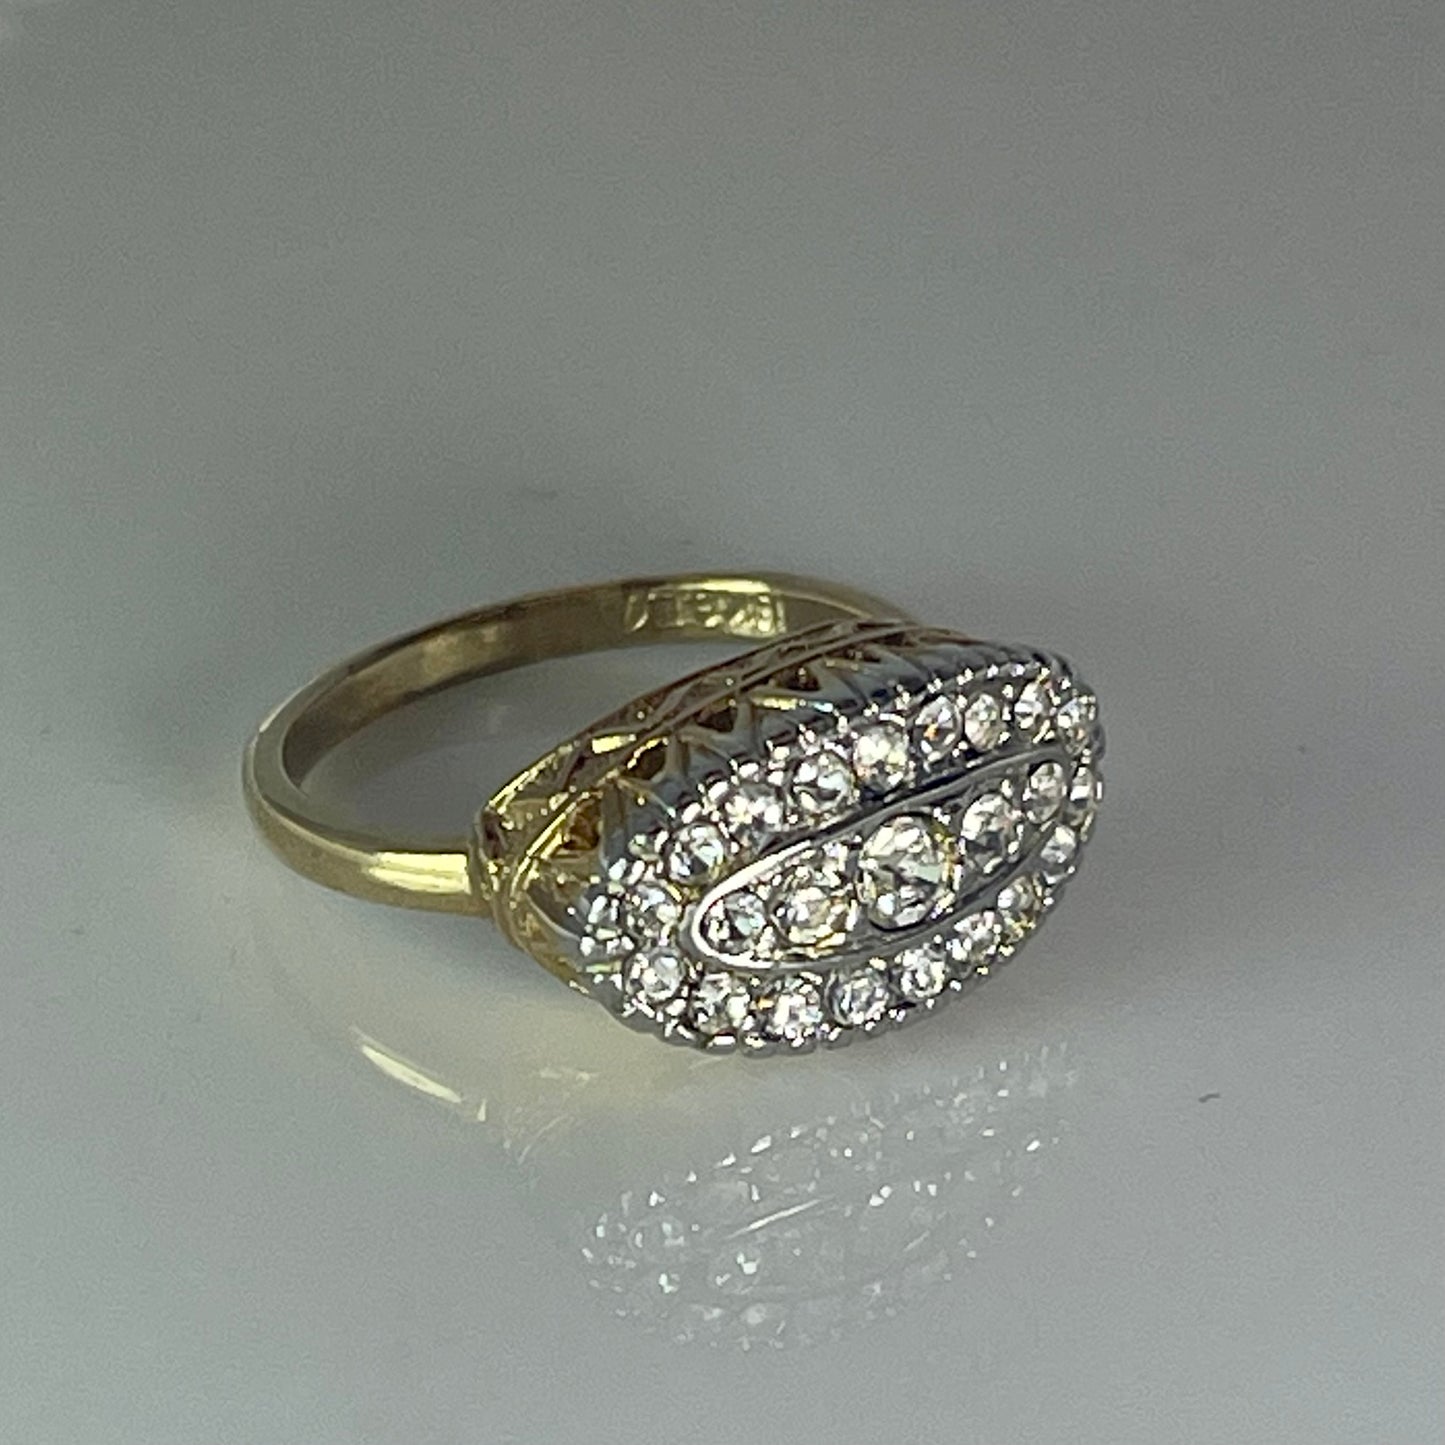 Vintage Clear Crystal Pave Ring in Yellow or White 18kt Gold Electroplated Setting Made in the USA Size: 5